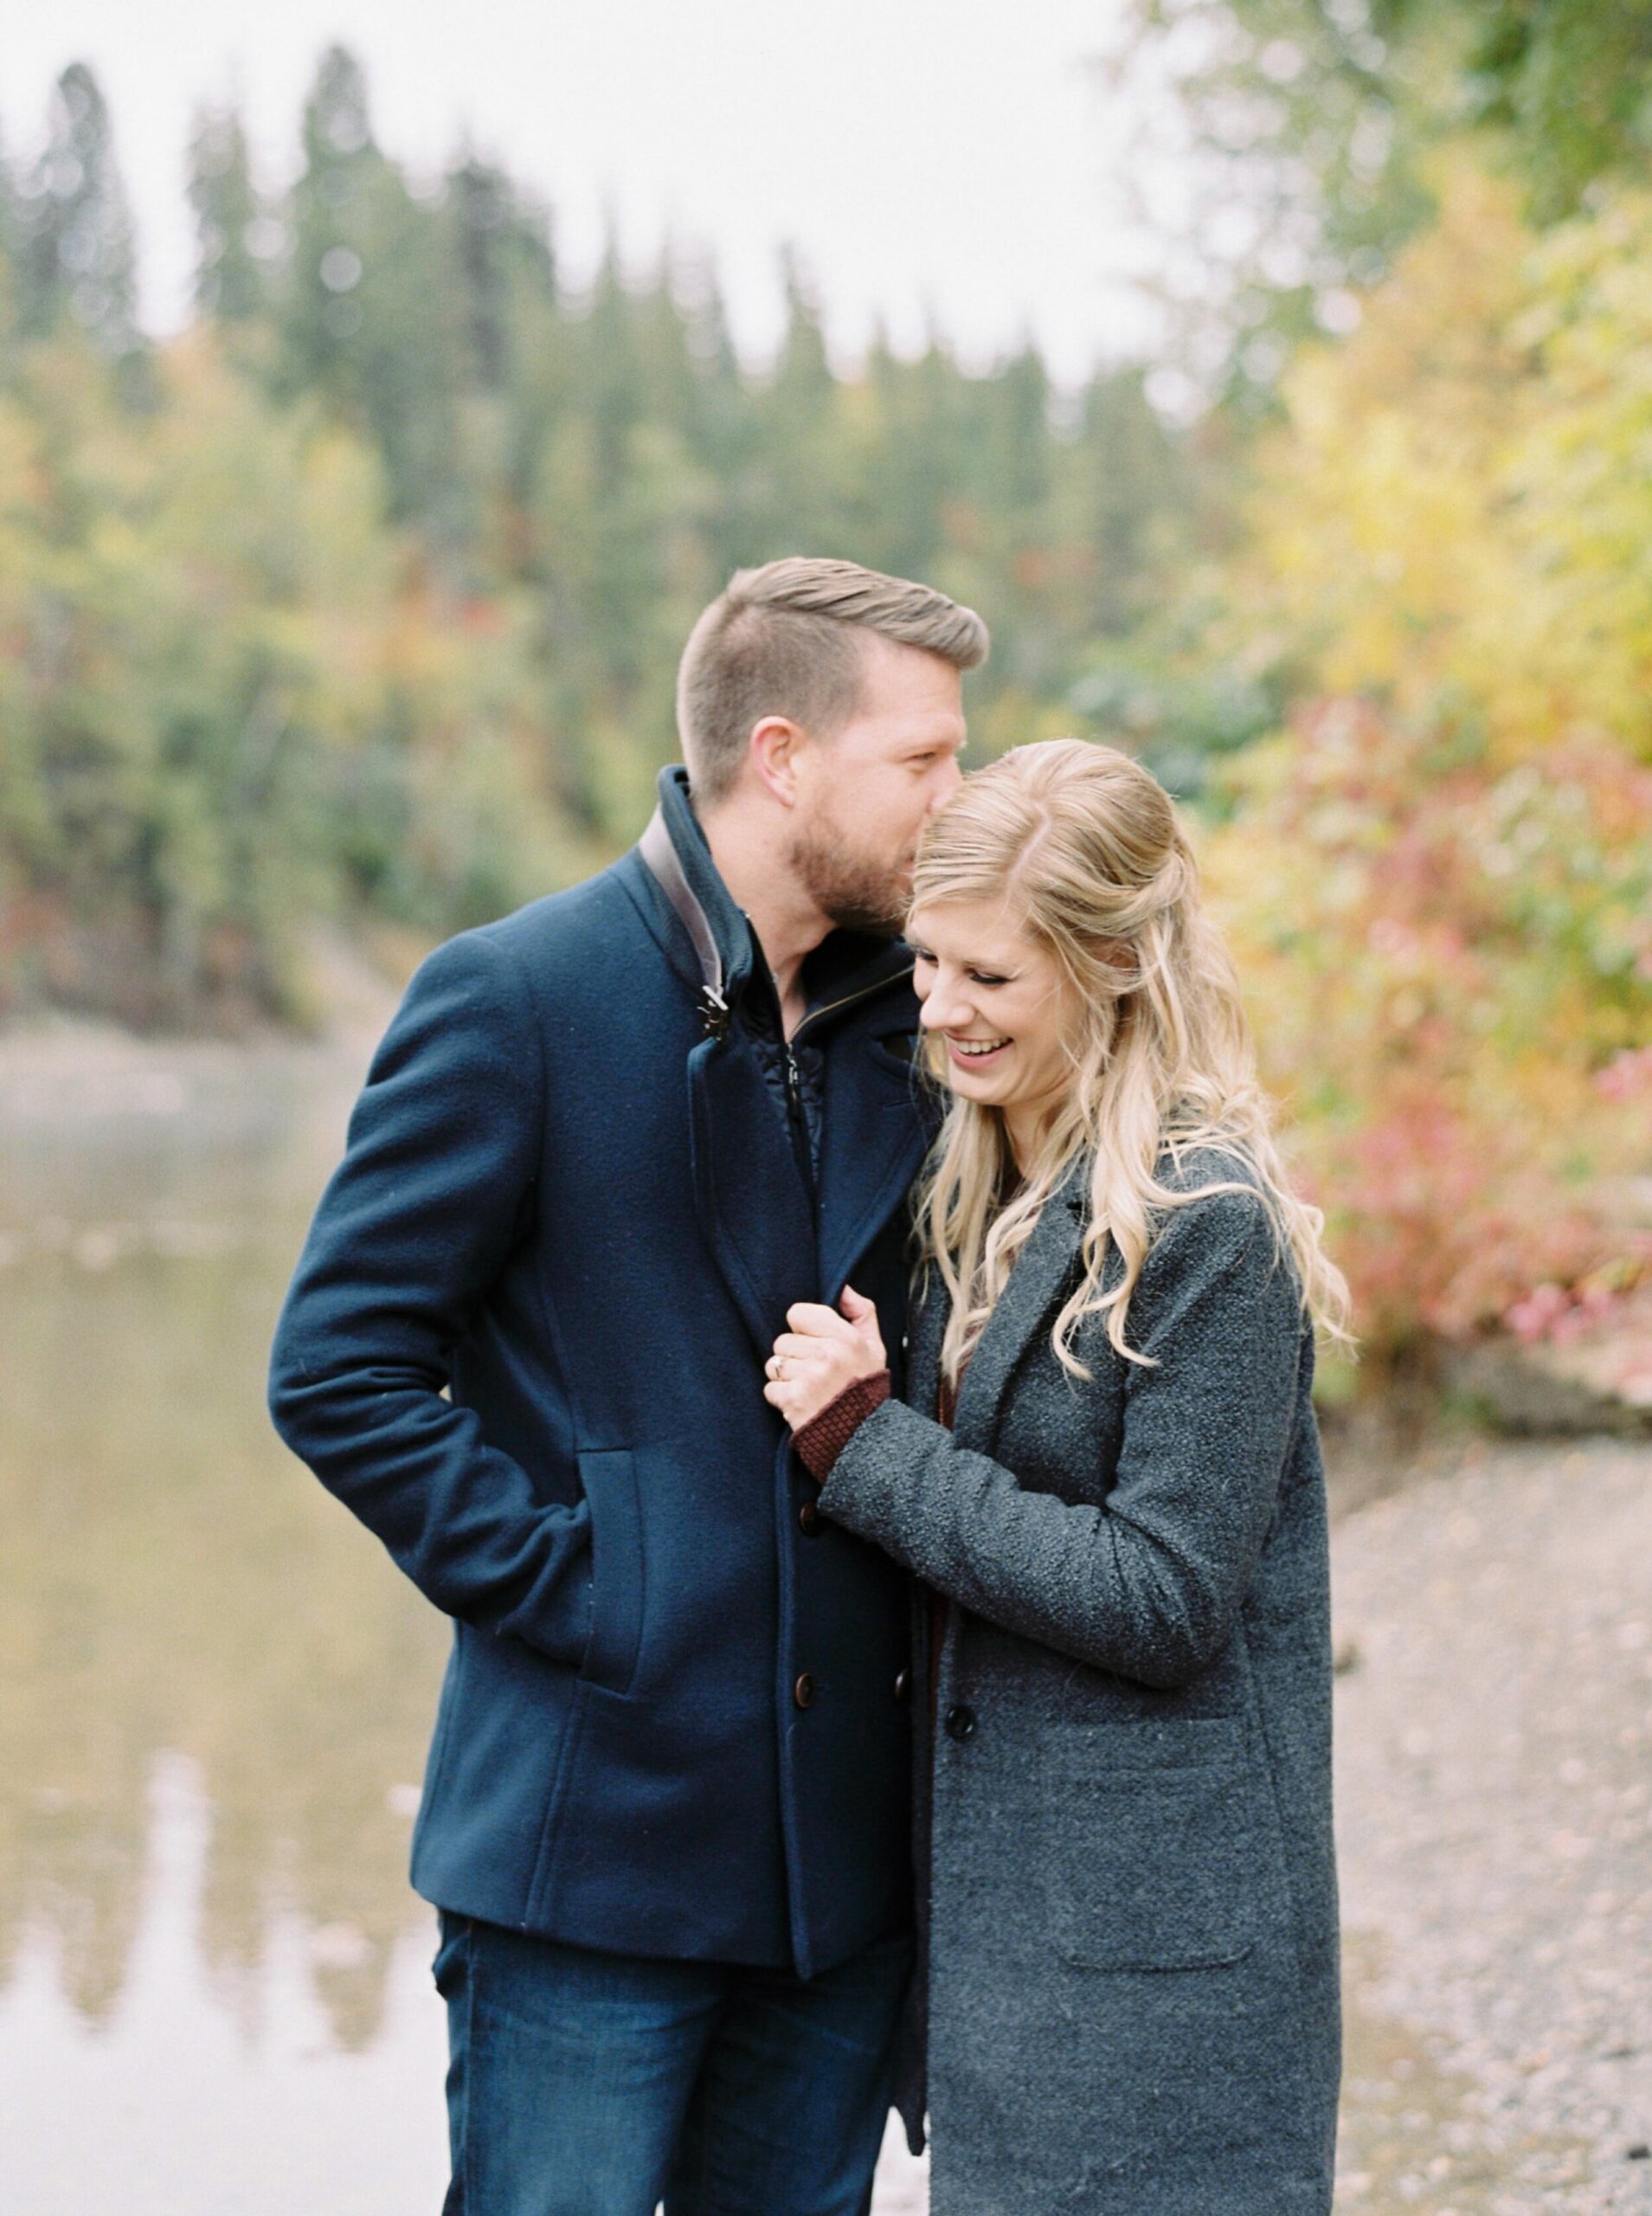  perfect fall colors for calgary river side engagement sesson with dogs | couples pose ideas for engaement photos | fine art film photographers 